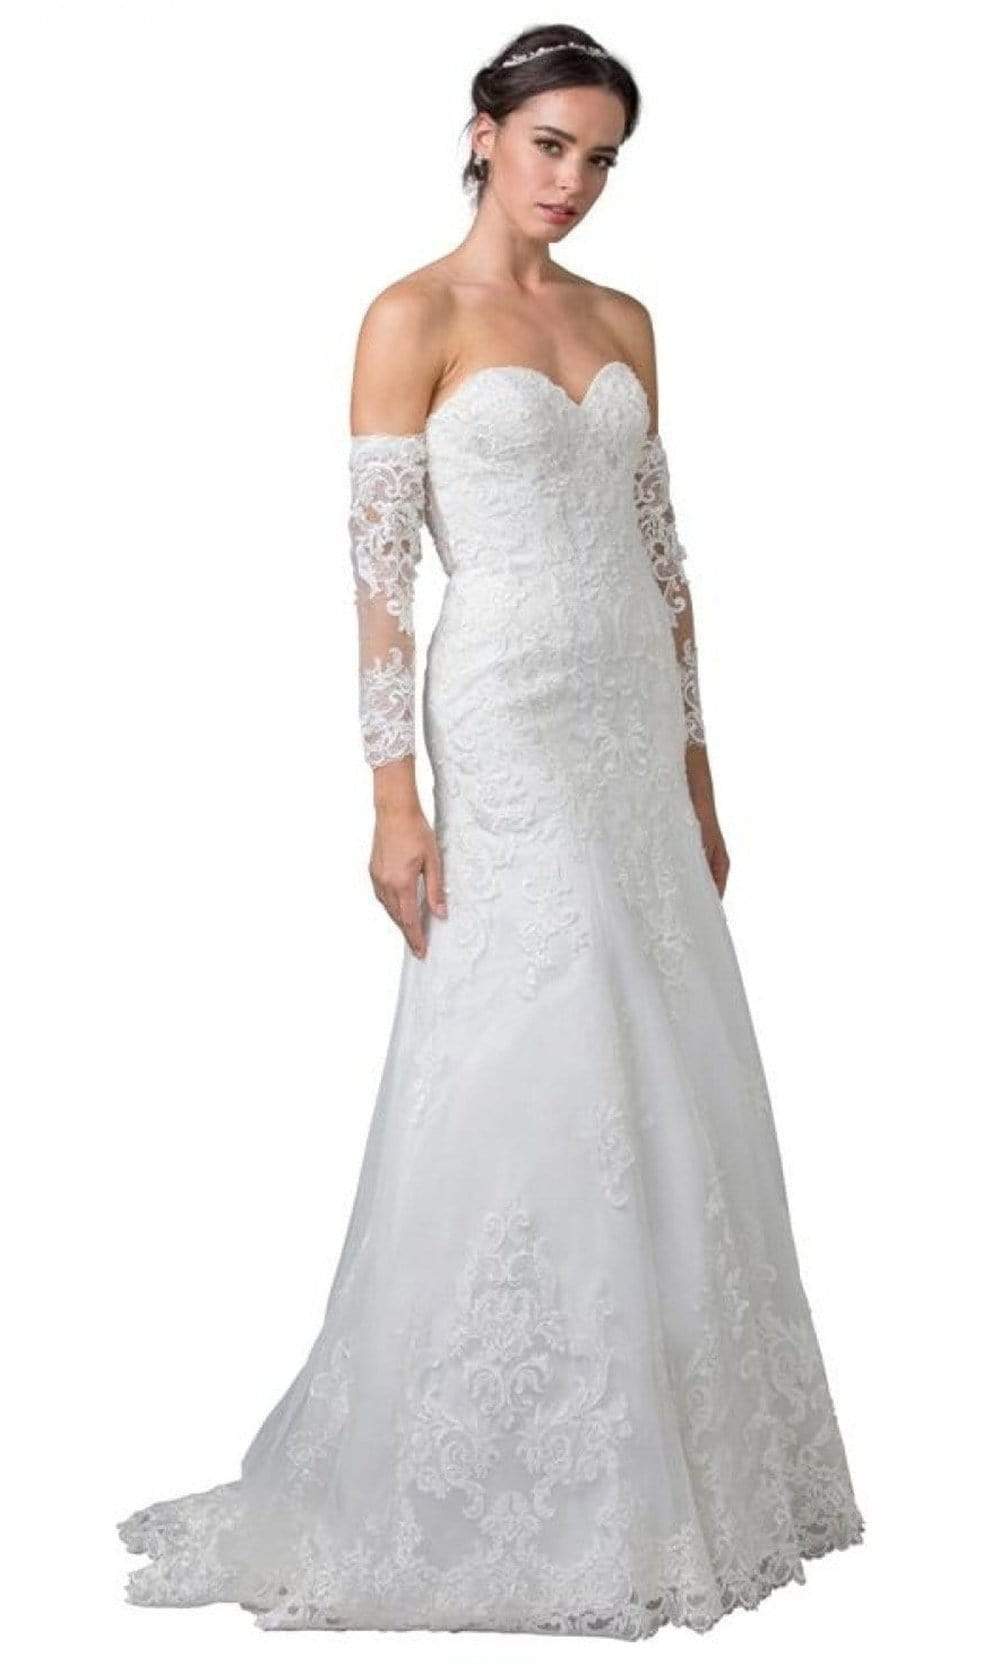 Image of Aspeed Bridal - W2376 Arm Sleeve Sweetheart Bridal Gown